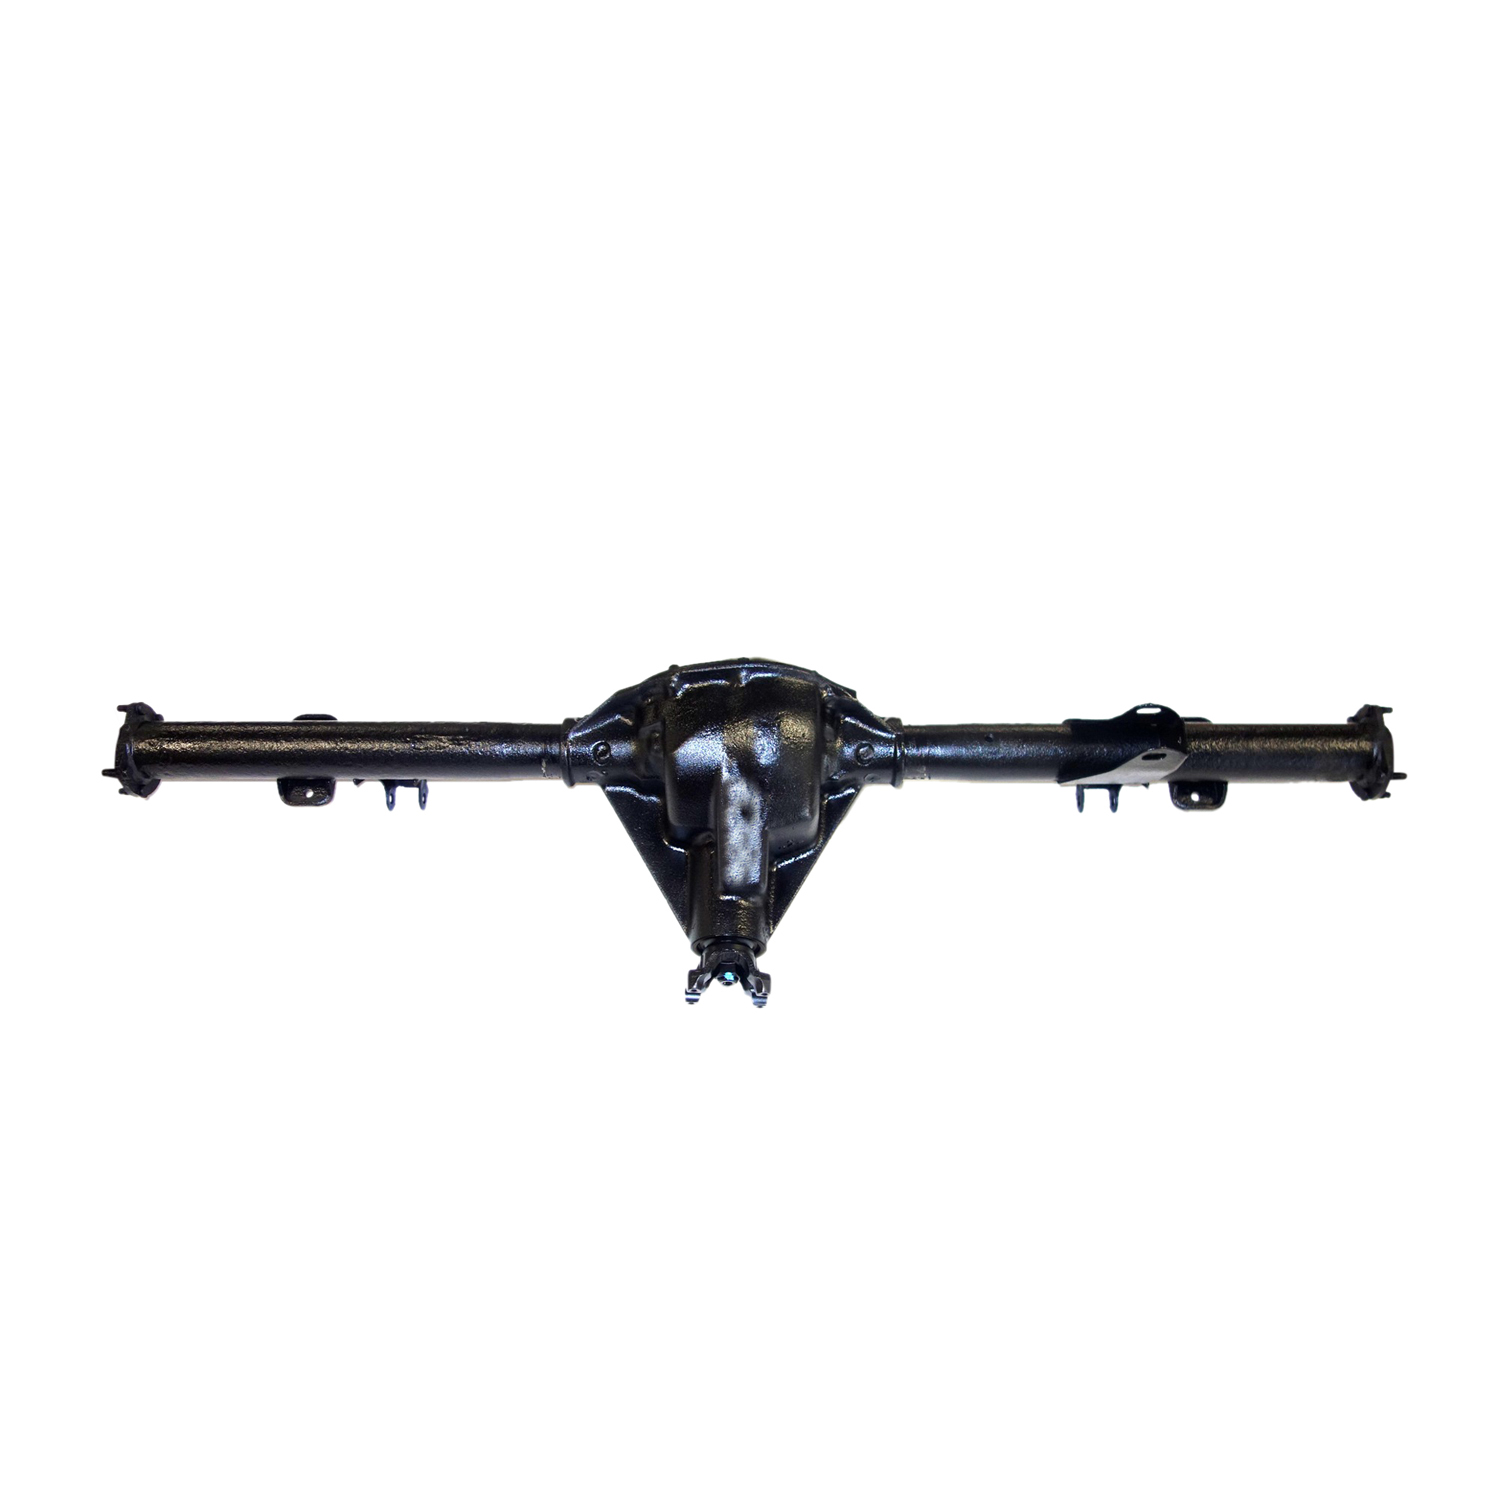 Remanufactured Axle Assy for Dana 35 94-98 Grand